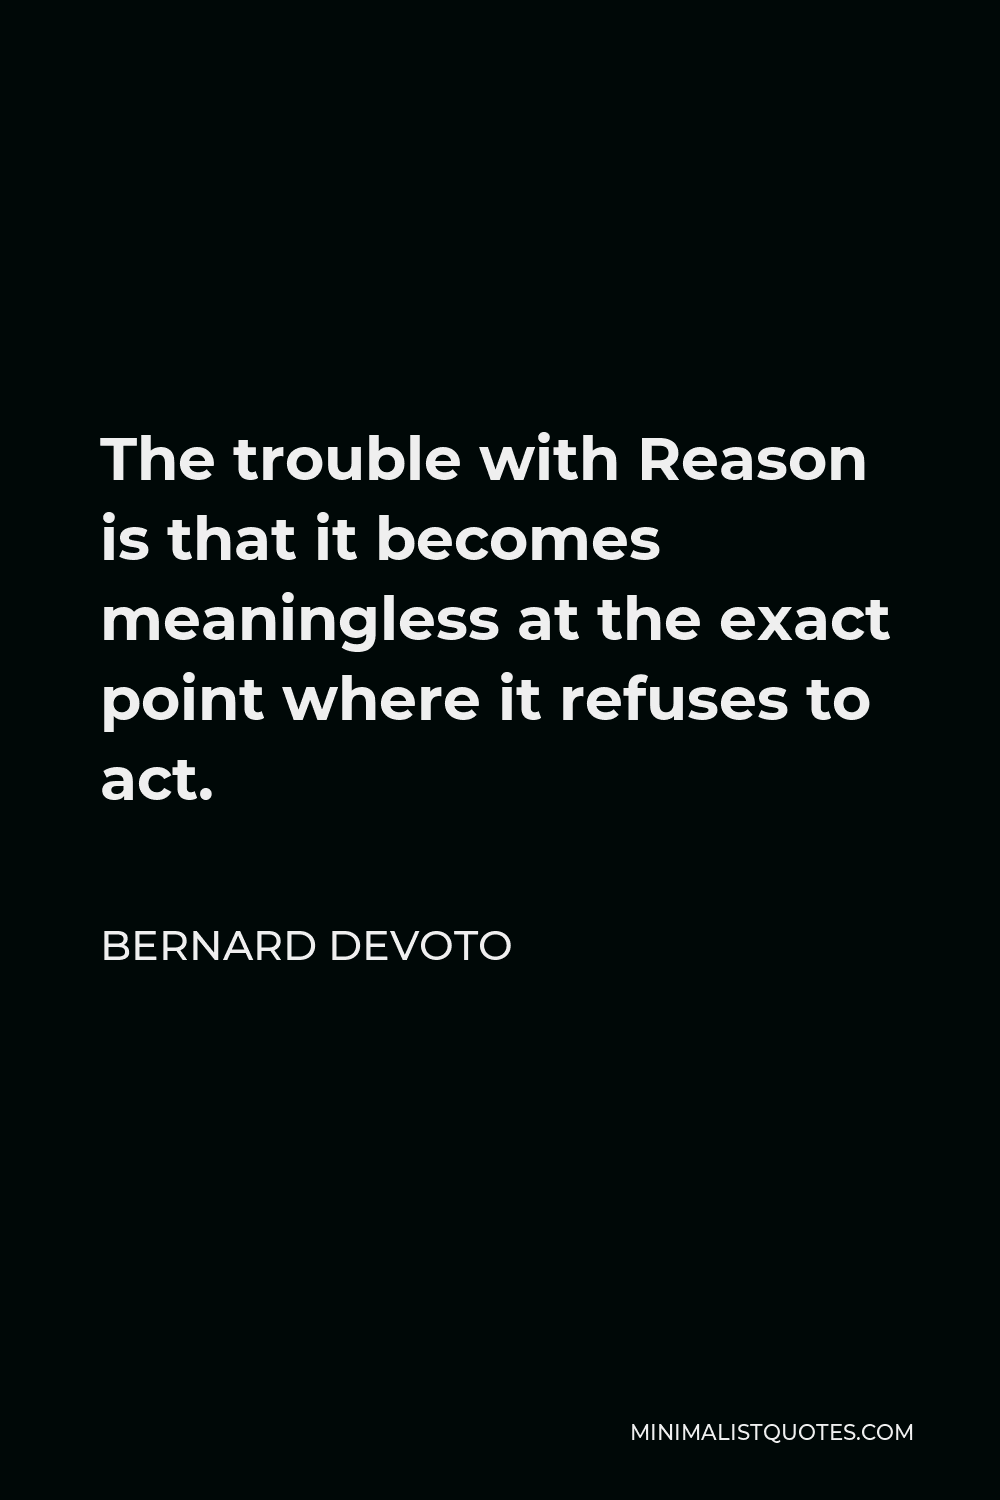 Bernard DeVoto Quote - The trouble with Reason is that it becomes meaningless at the exact point where it refuses to act.